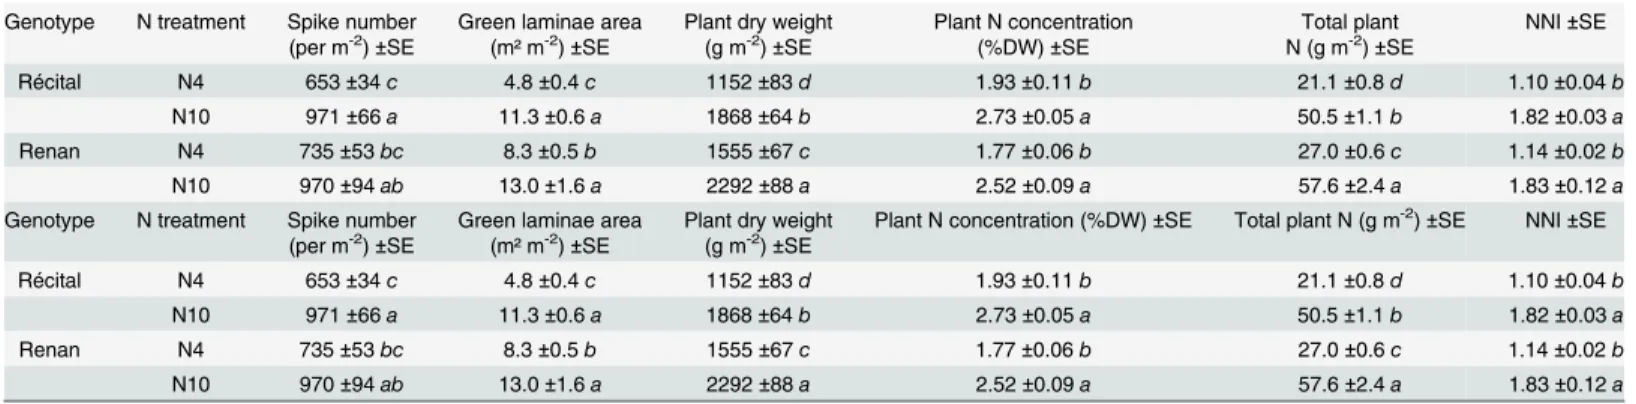 Table 1. Spike number, green laminae area, plant dry weight, plant N concentration, total plant N and Nitrogen Nutrition Index (NNI) at flowering for the two genotypes at two contrasting pre-flowering N treatments